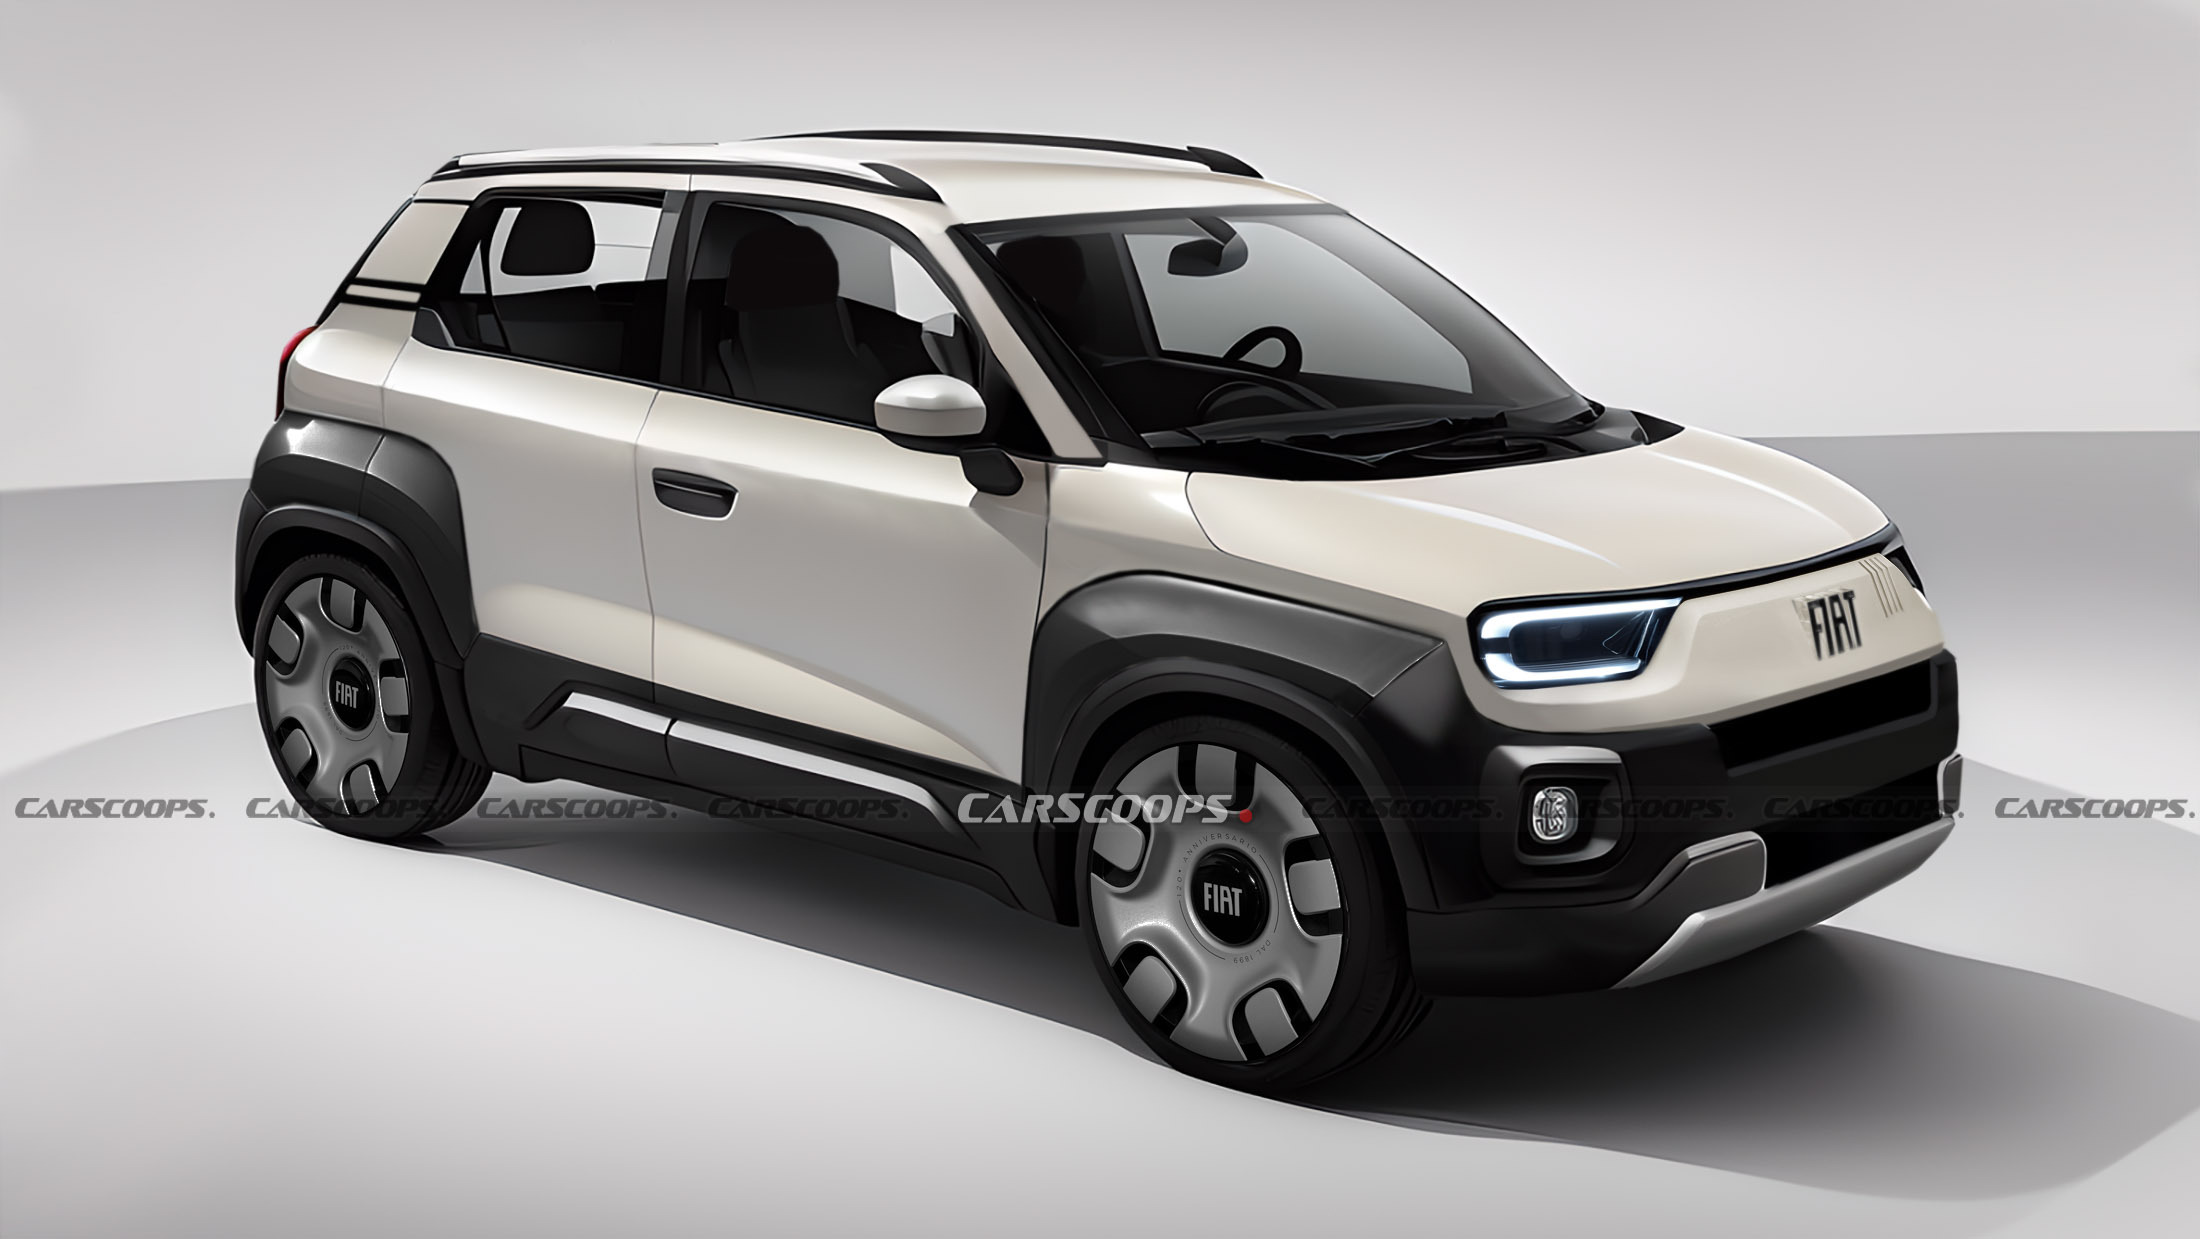 What If This 2011 Rendering Anticipated The Future Renault 4 EV?